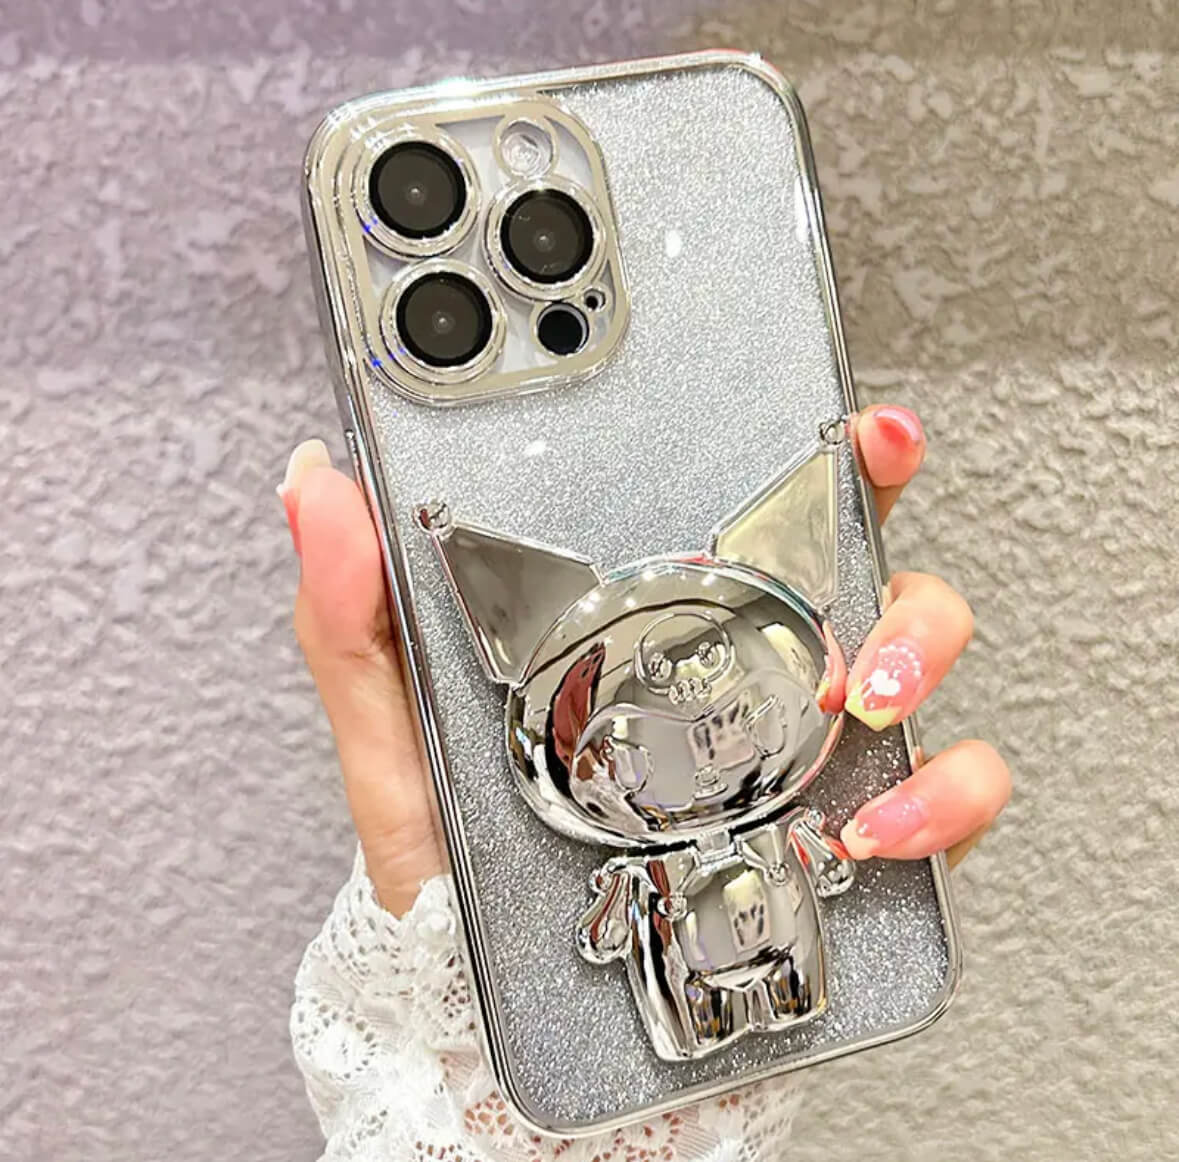 Shiny stand mirror phone case Apple_Shopier